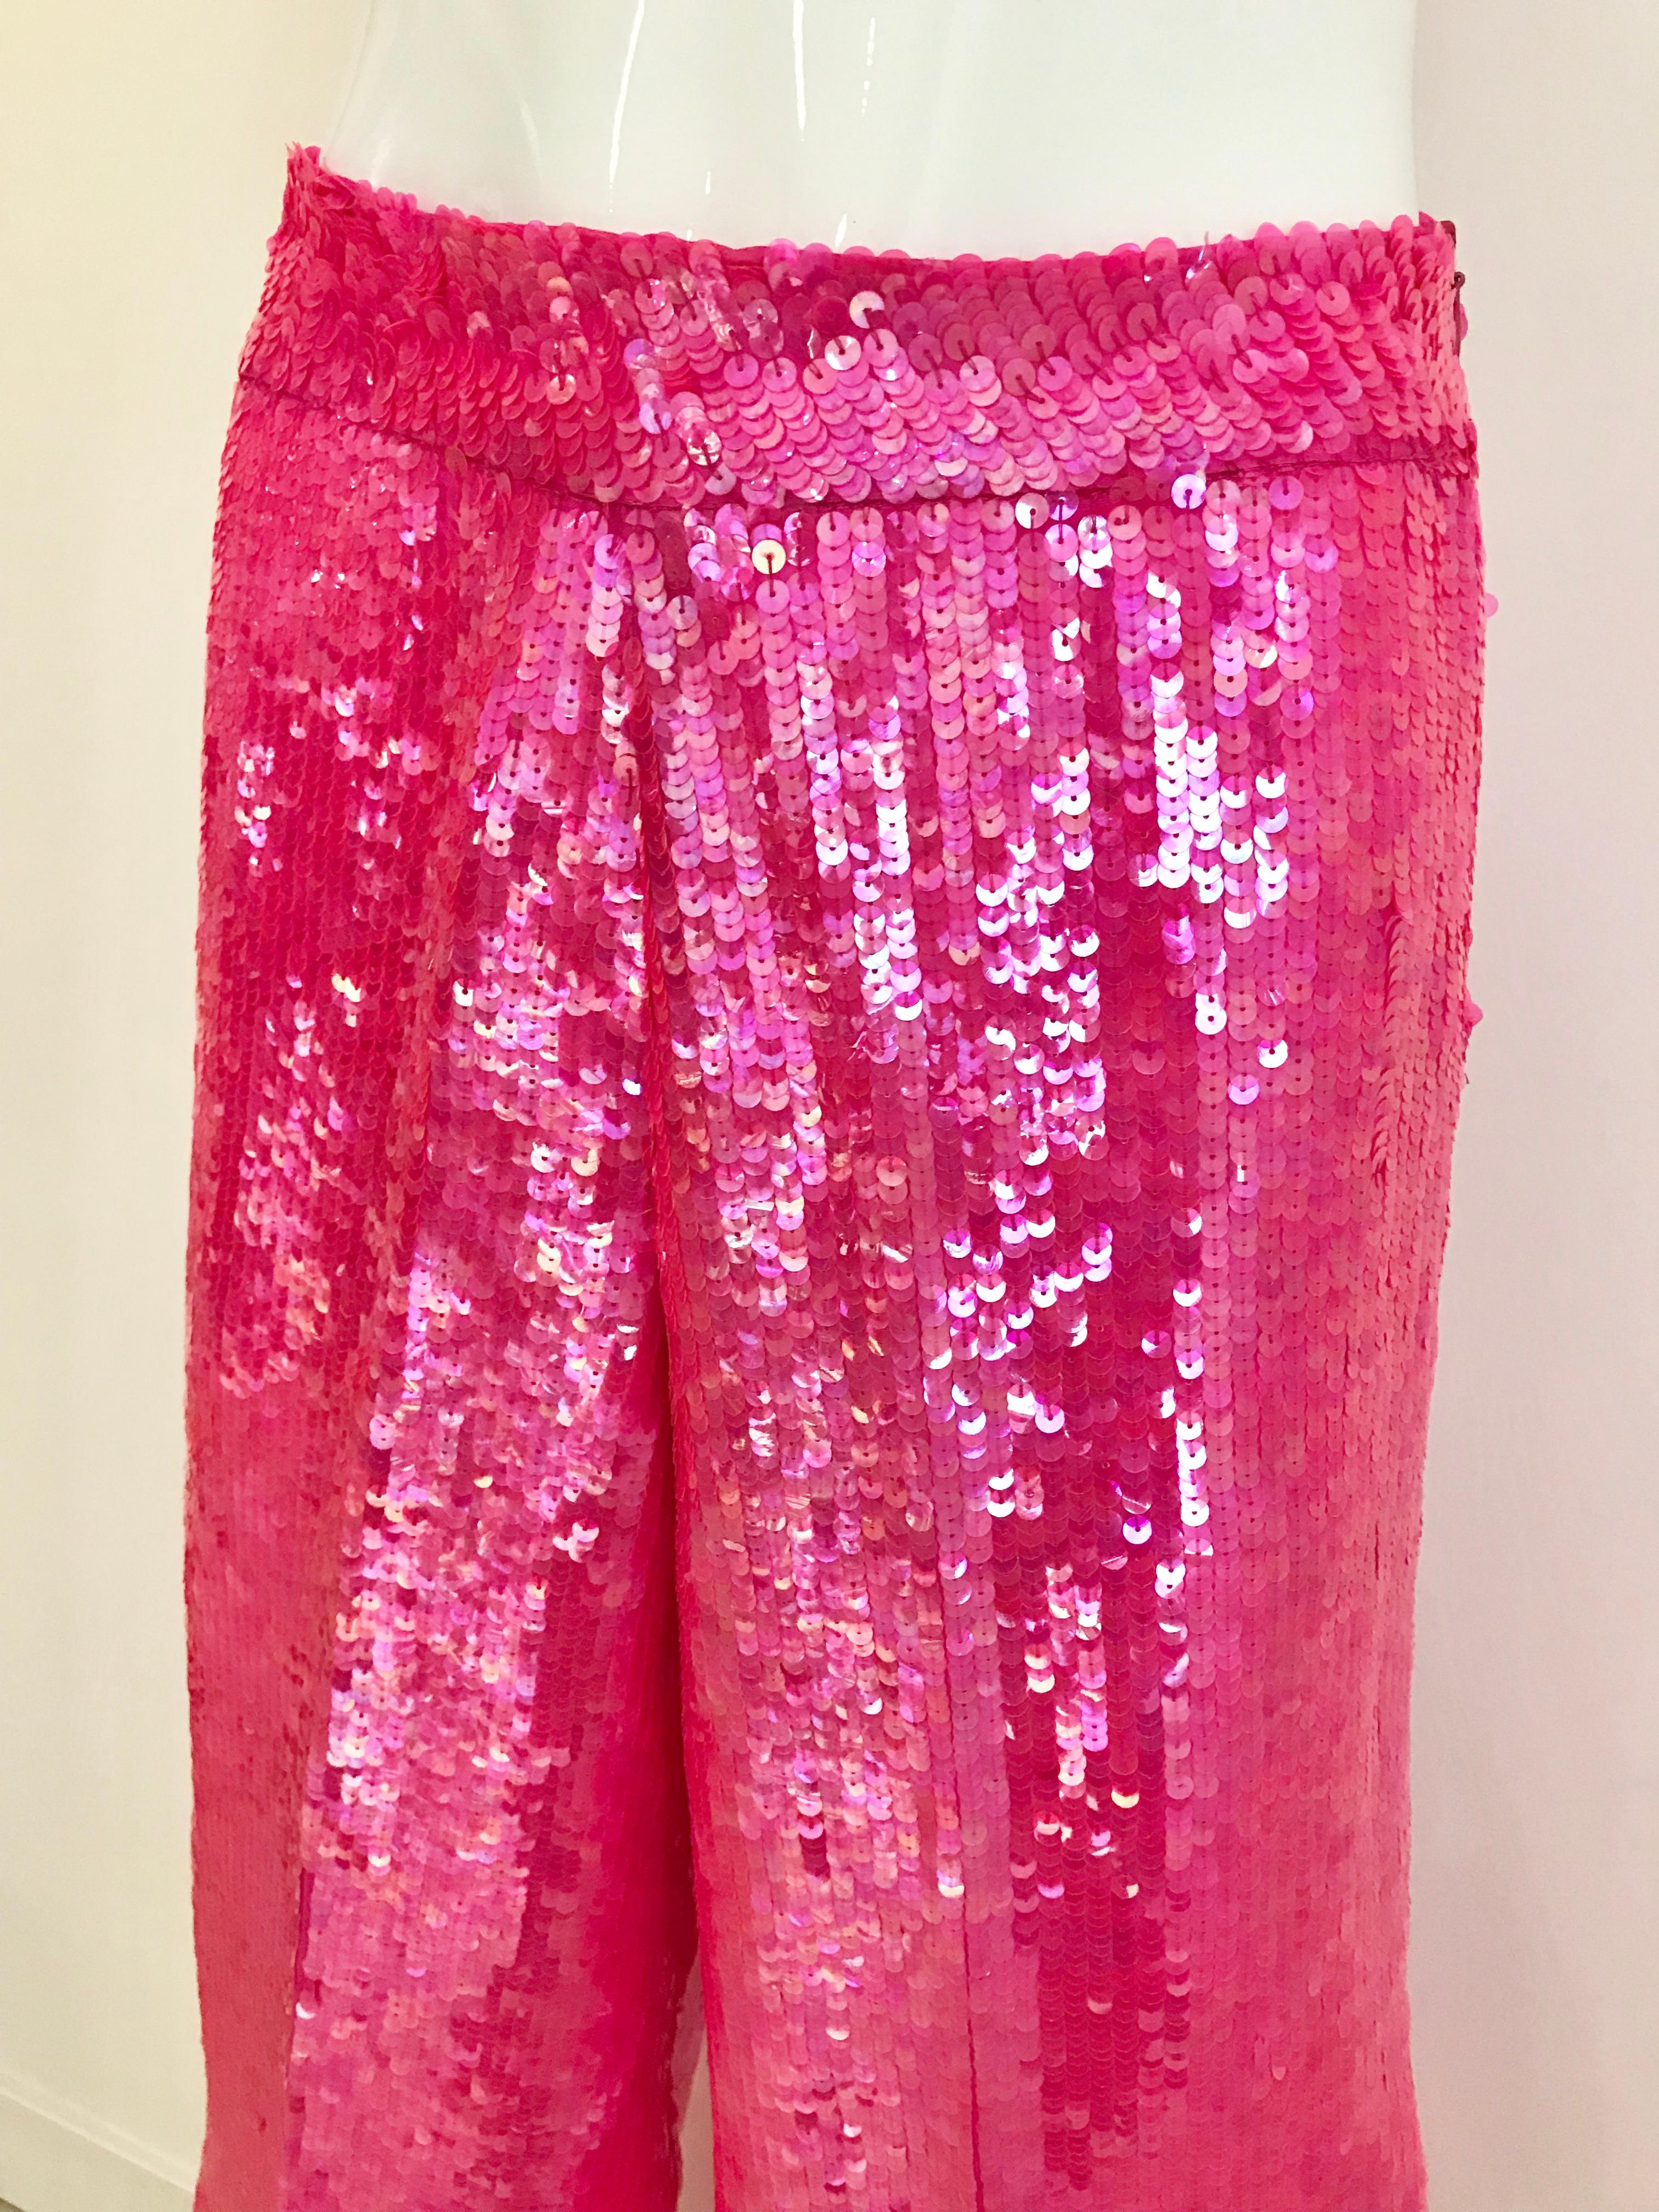 Deadstock 1980s Anna Molinari hot pink sequin shimmer pants.
Waist: 28 inches/ Hip: 38 inches/ Lenght: 44 inches
Pants is deadstock ( never worn)